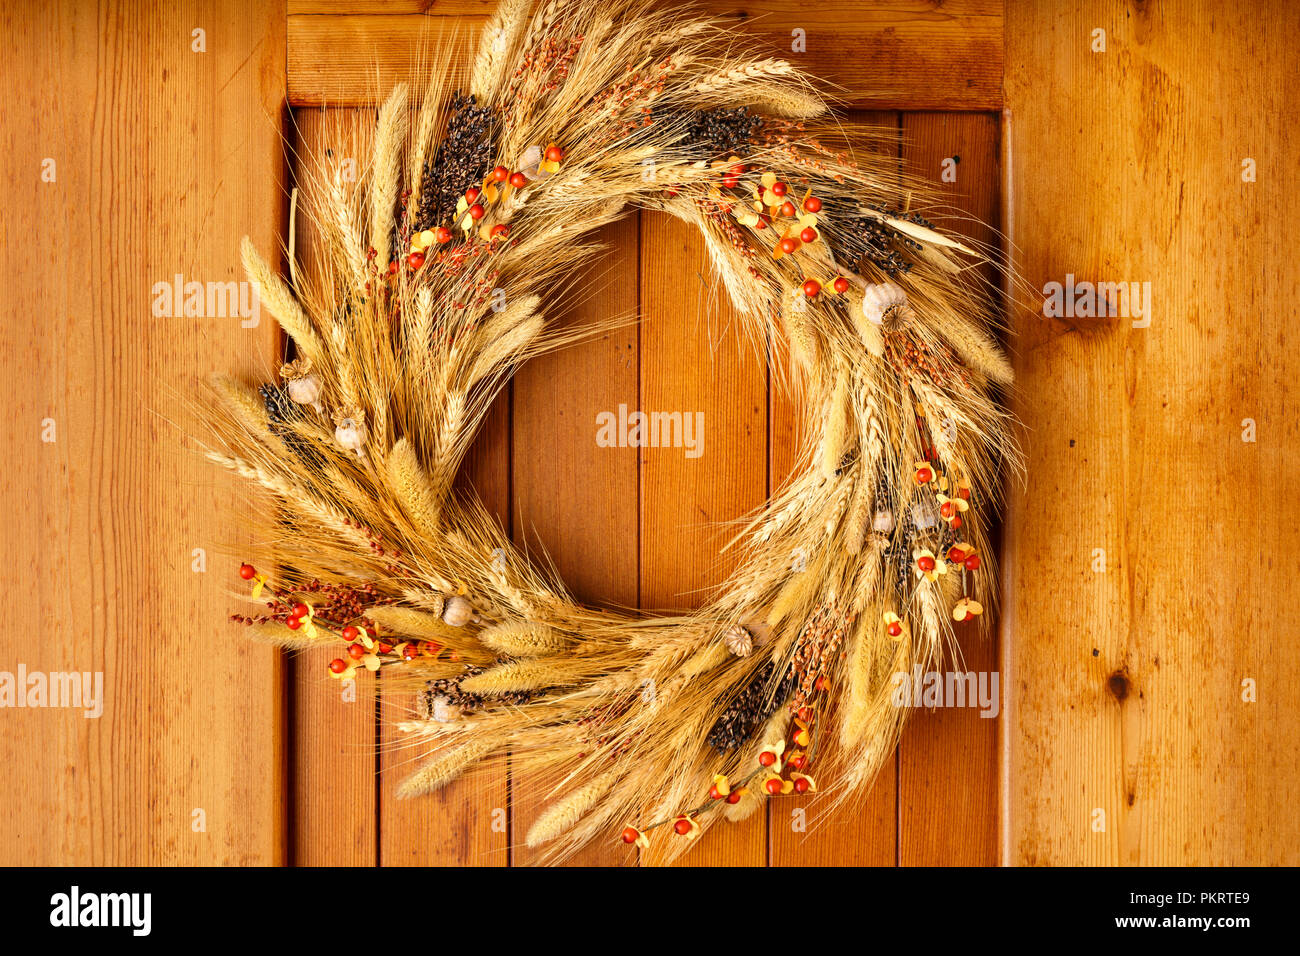 House home front door Fall autumn Thanksgiving decorations country style rustic wreath made of natural botanical materials on wood background Stock Photo